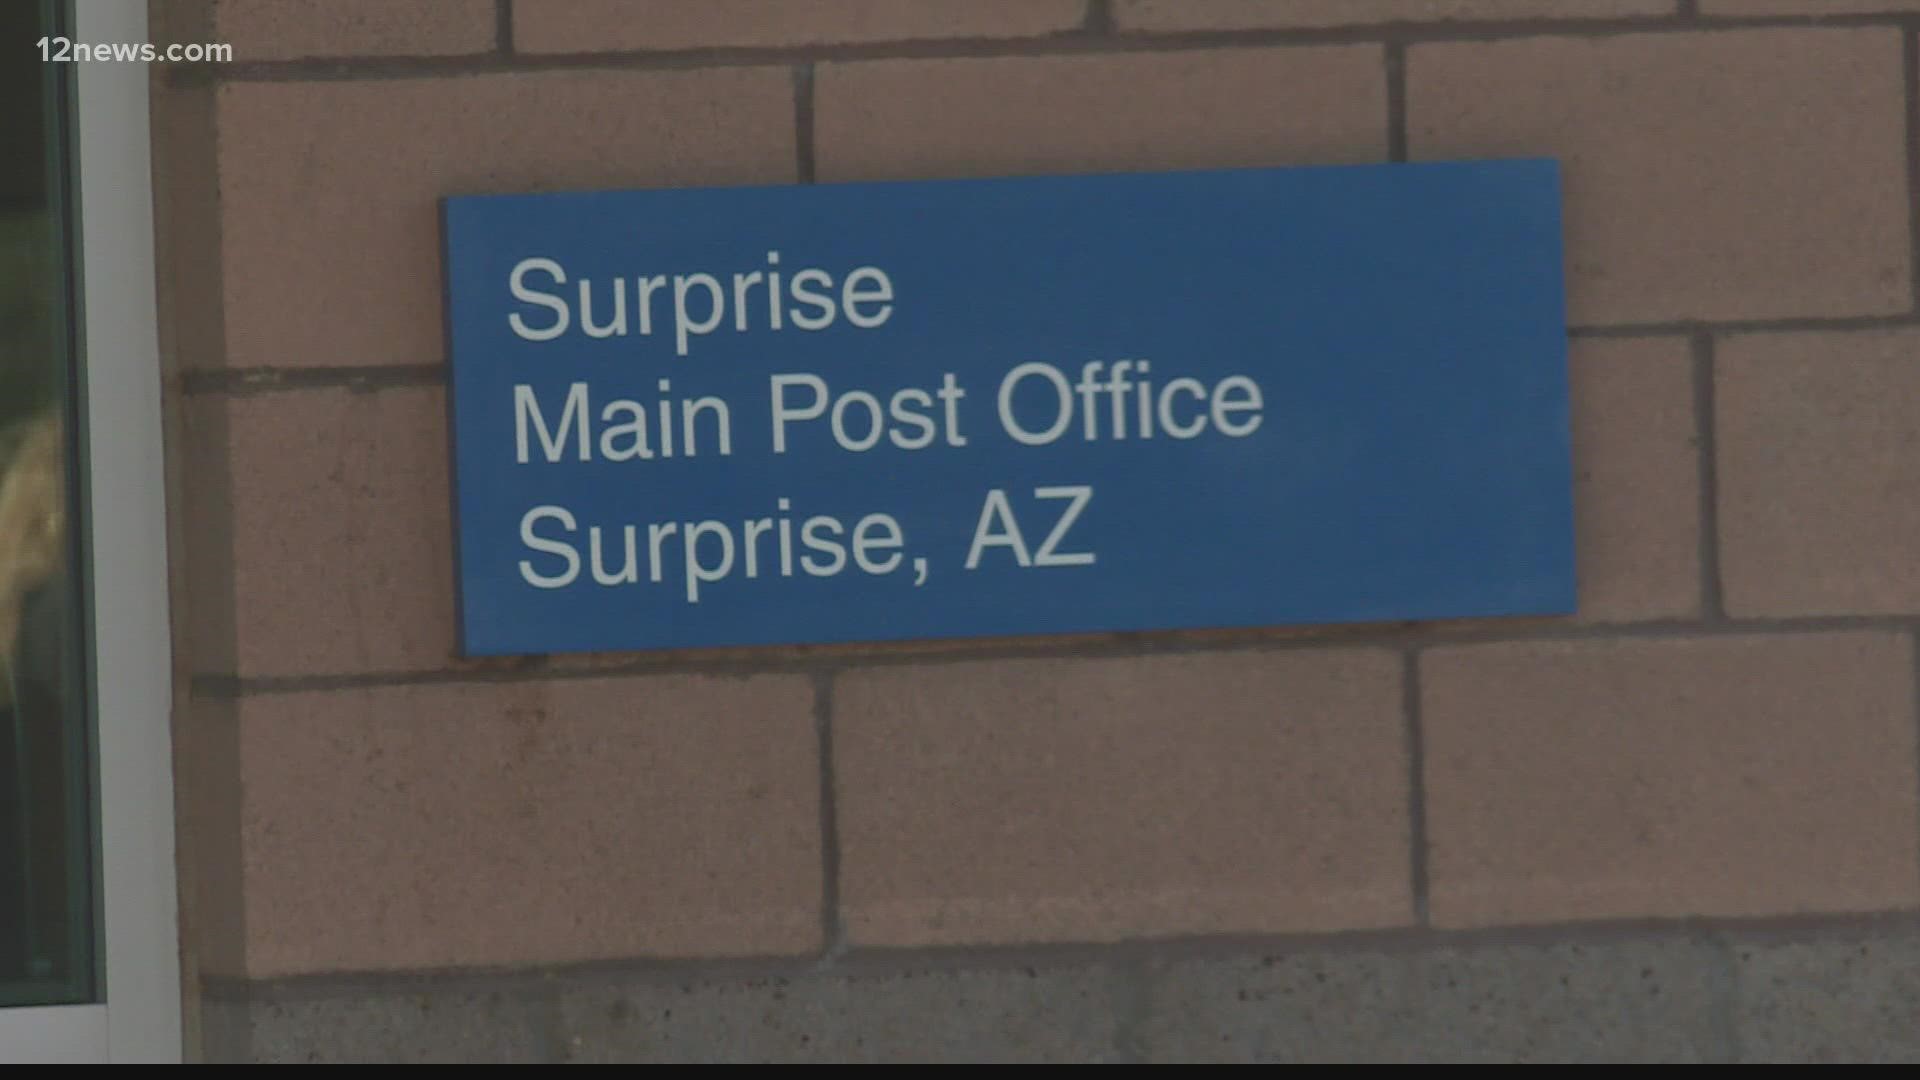 The Surprise post office held a dedication ceremony of their building to the life and legacy of Navy SEAL Marc Lee.